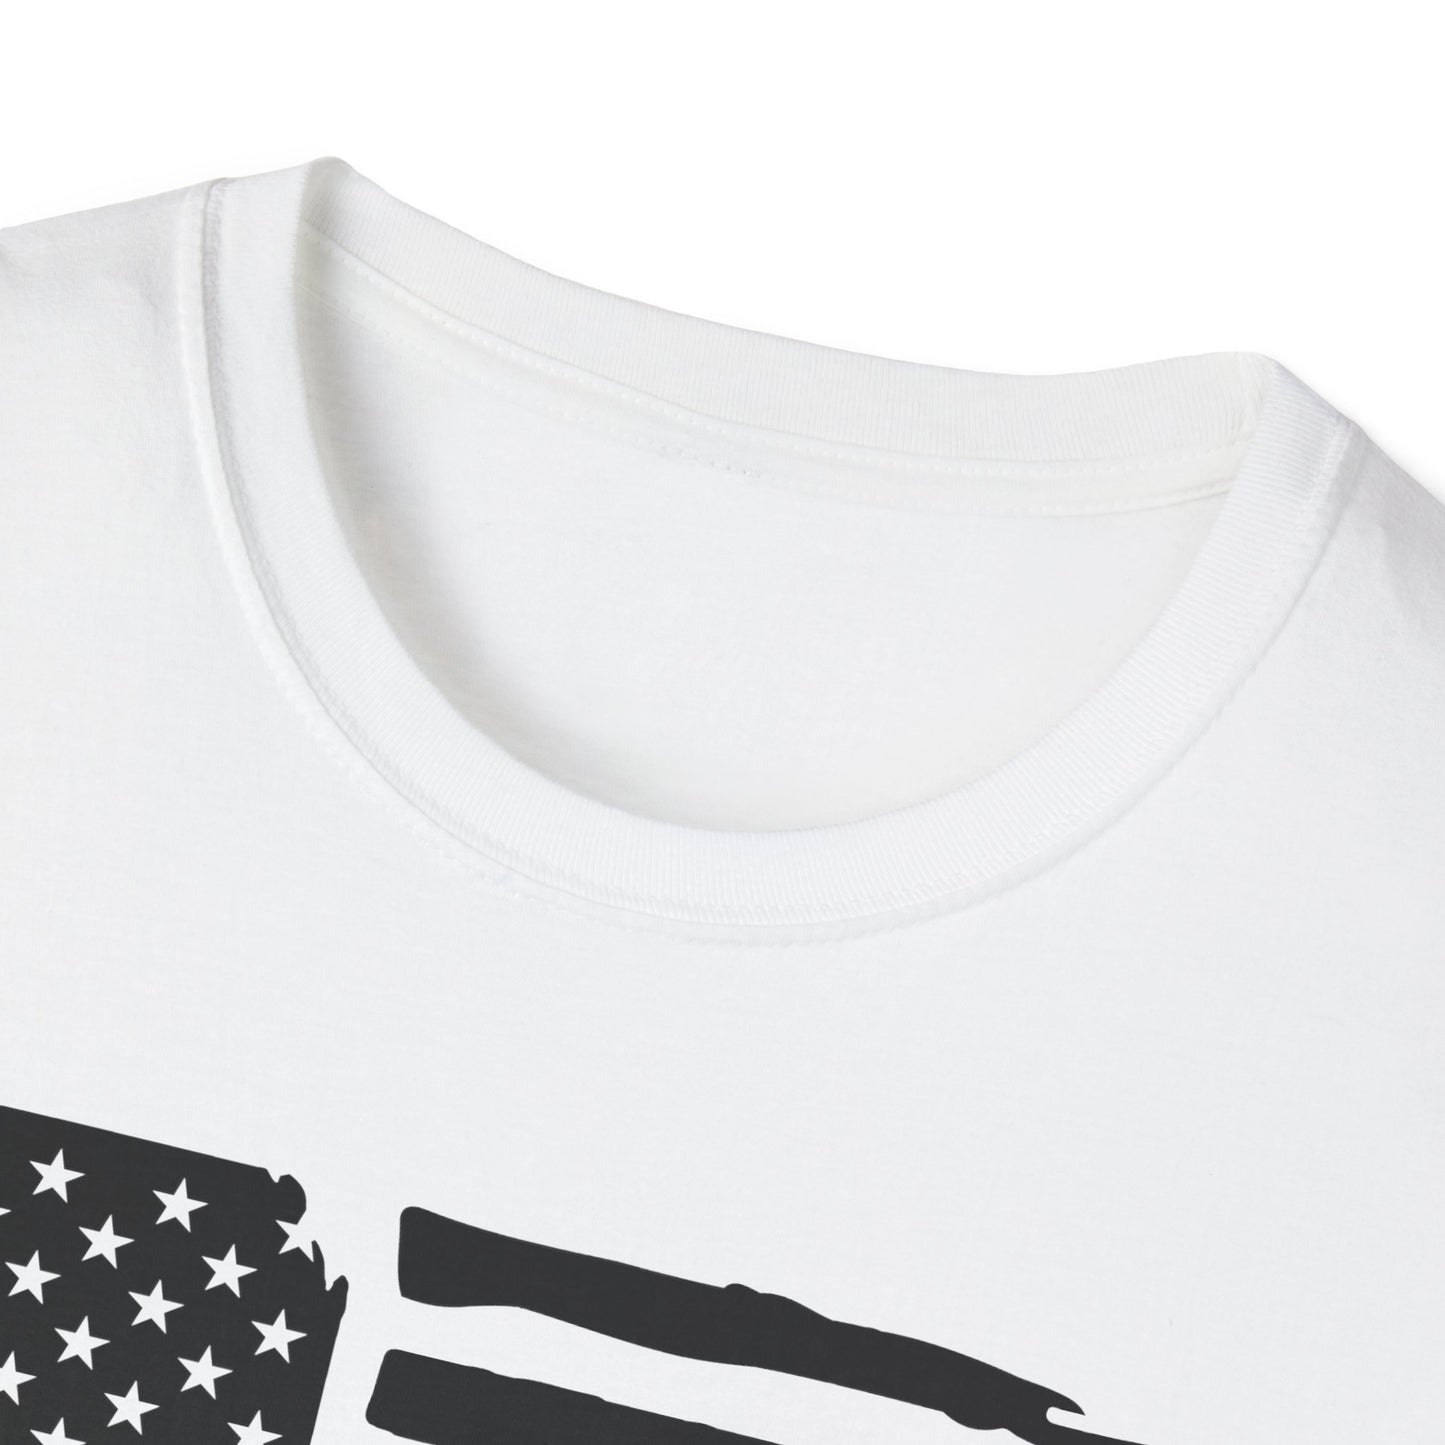 Distressed American Flag B&W - Wife - Unisex Softstyle T-Shirt